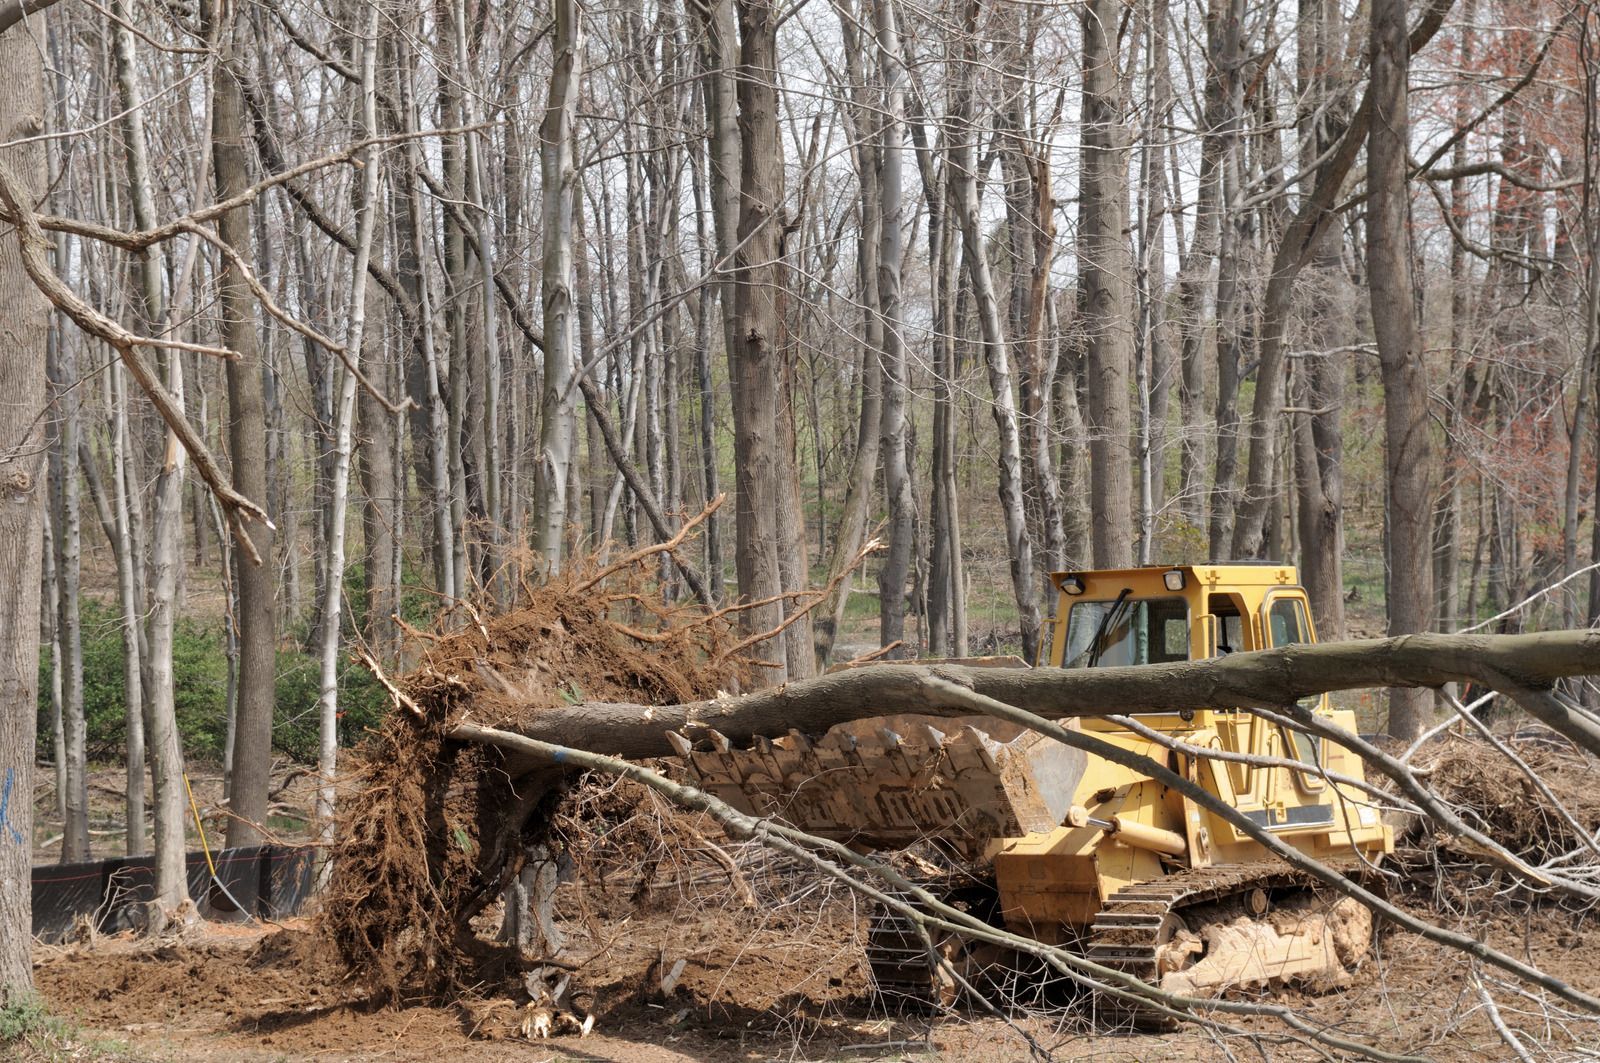 a yellow bulldozer is clearing a forest of trees in Myrtle Beach, South Carolina